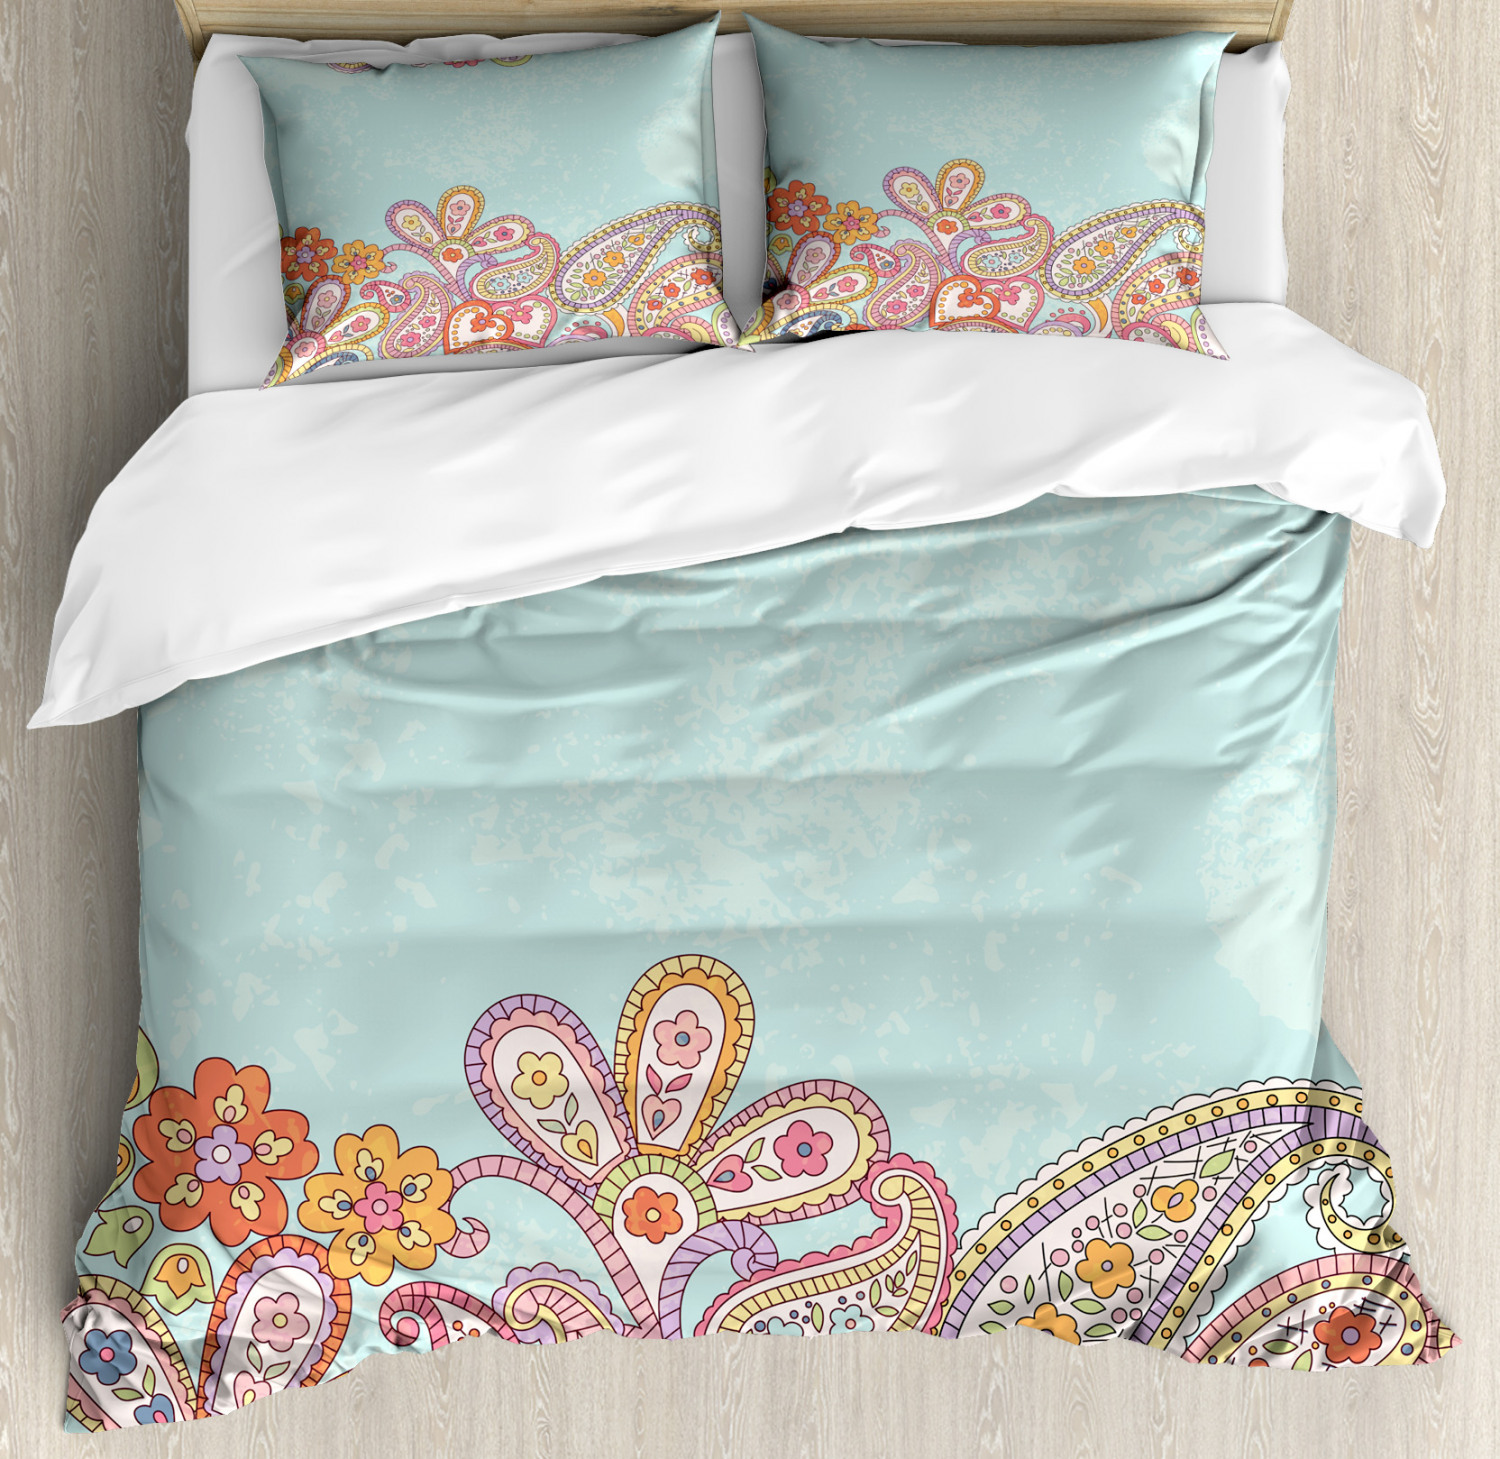 Floral Duvet Cover Set With Pillow Shams Hand Drawn Retro Paisley